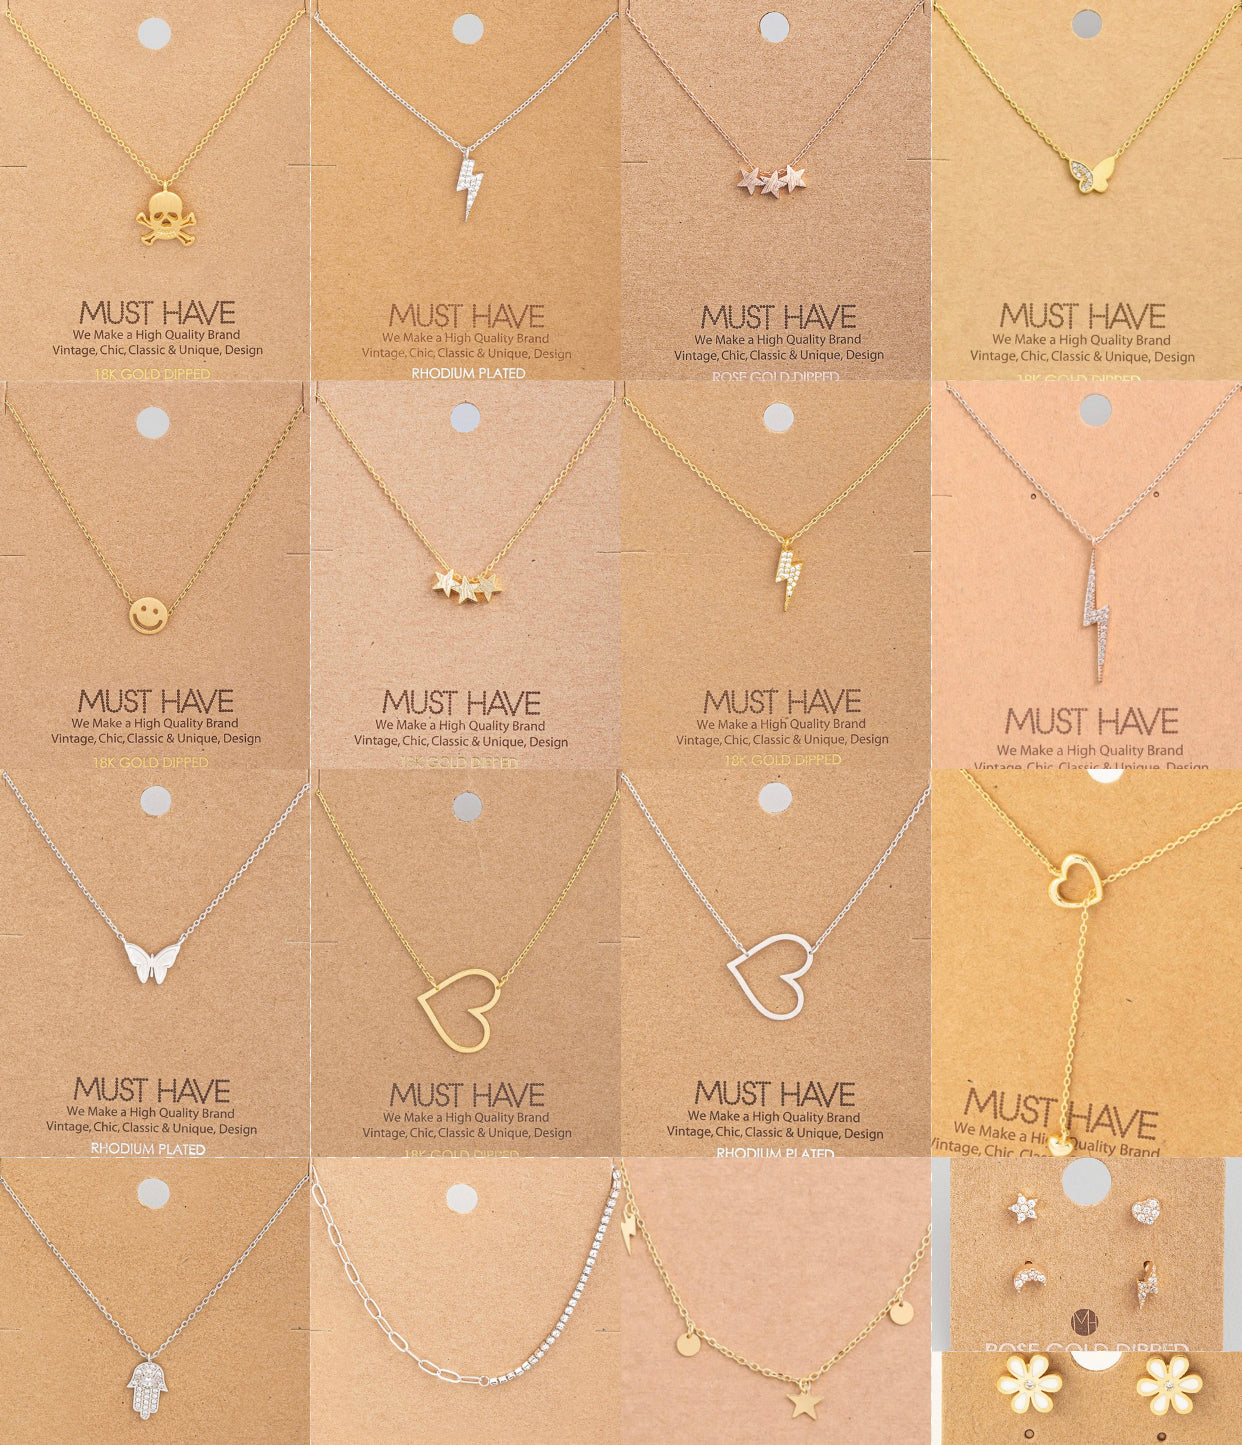 RESTOCKED! Top selling necklaces, GREAT for gifts!